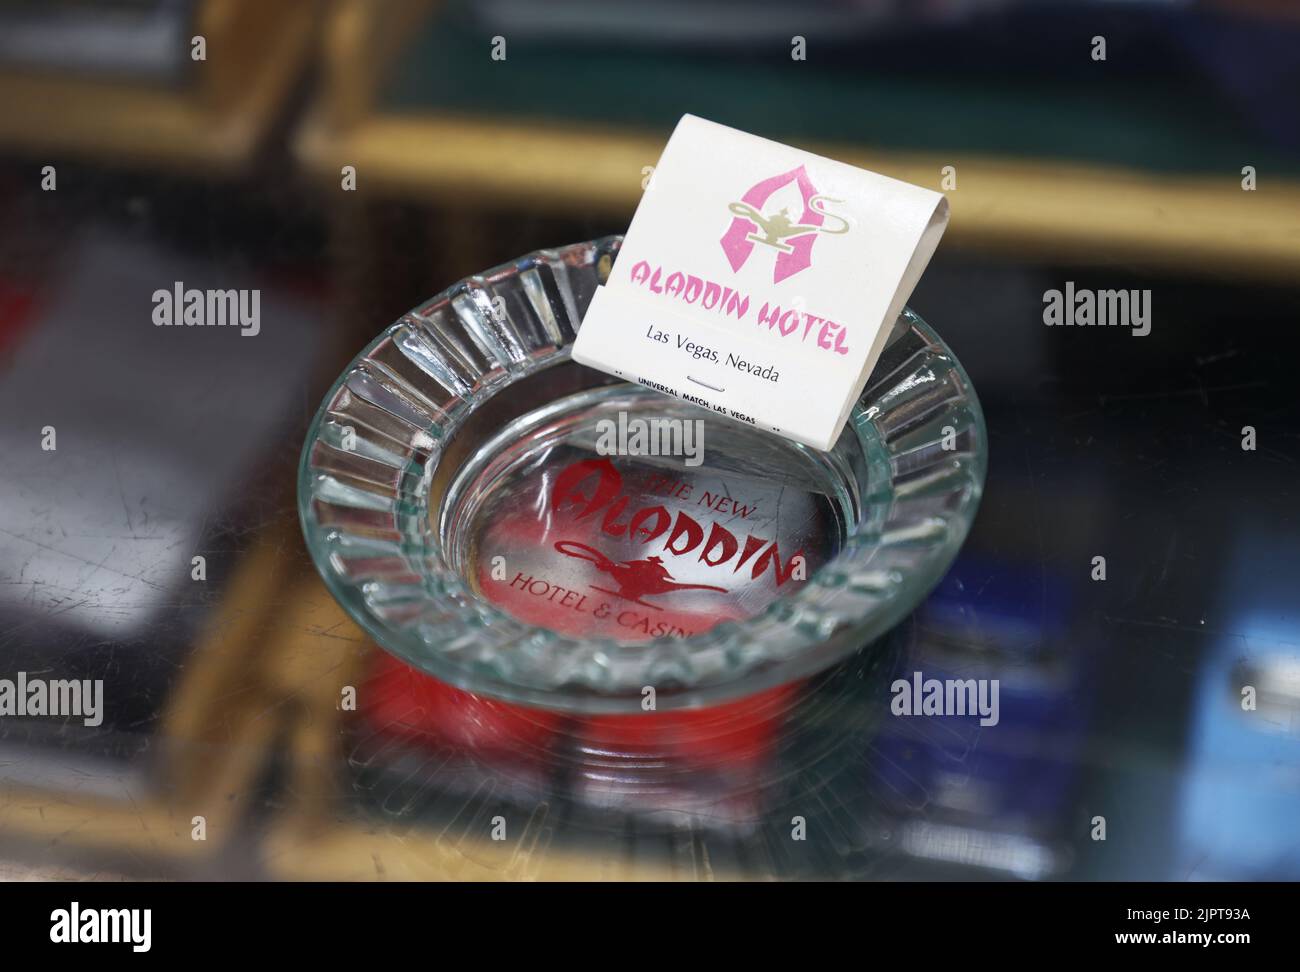 Signs and various souvenirs in a souvenir shop. An ashtray from The New Aladdin hotel and casino, Las Vegas, Nevada, US. Stock Photo